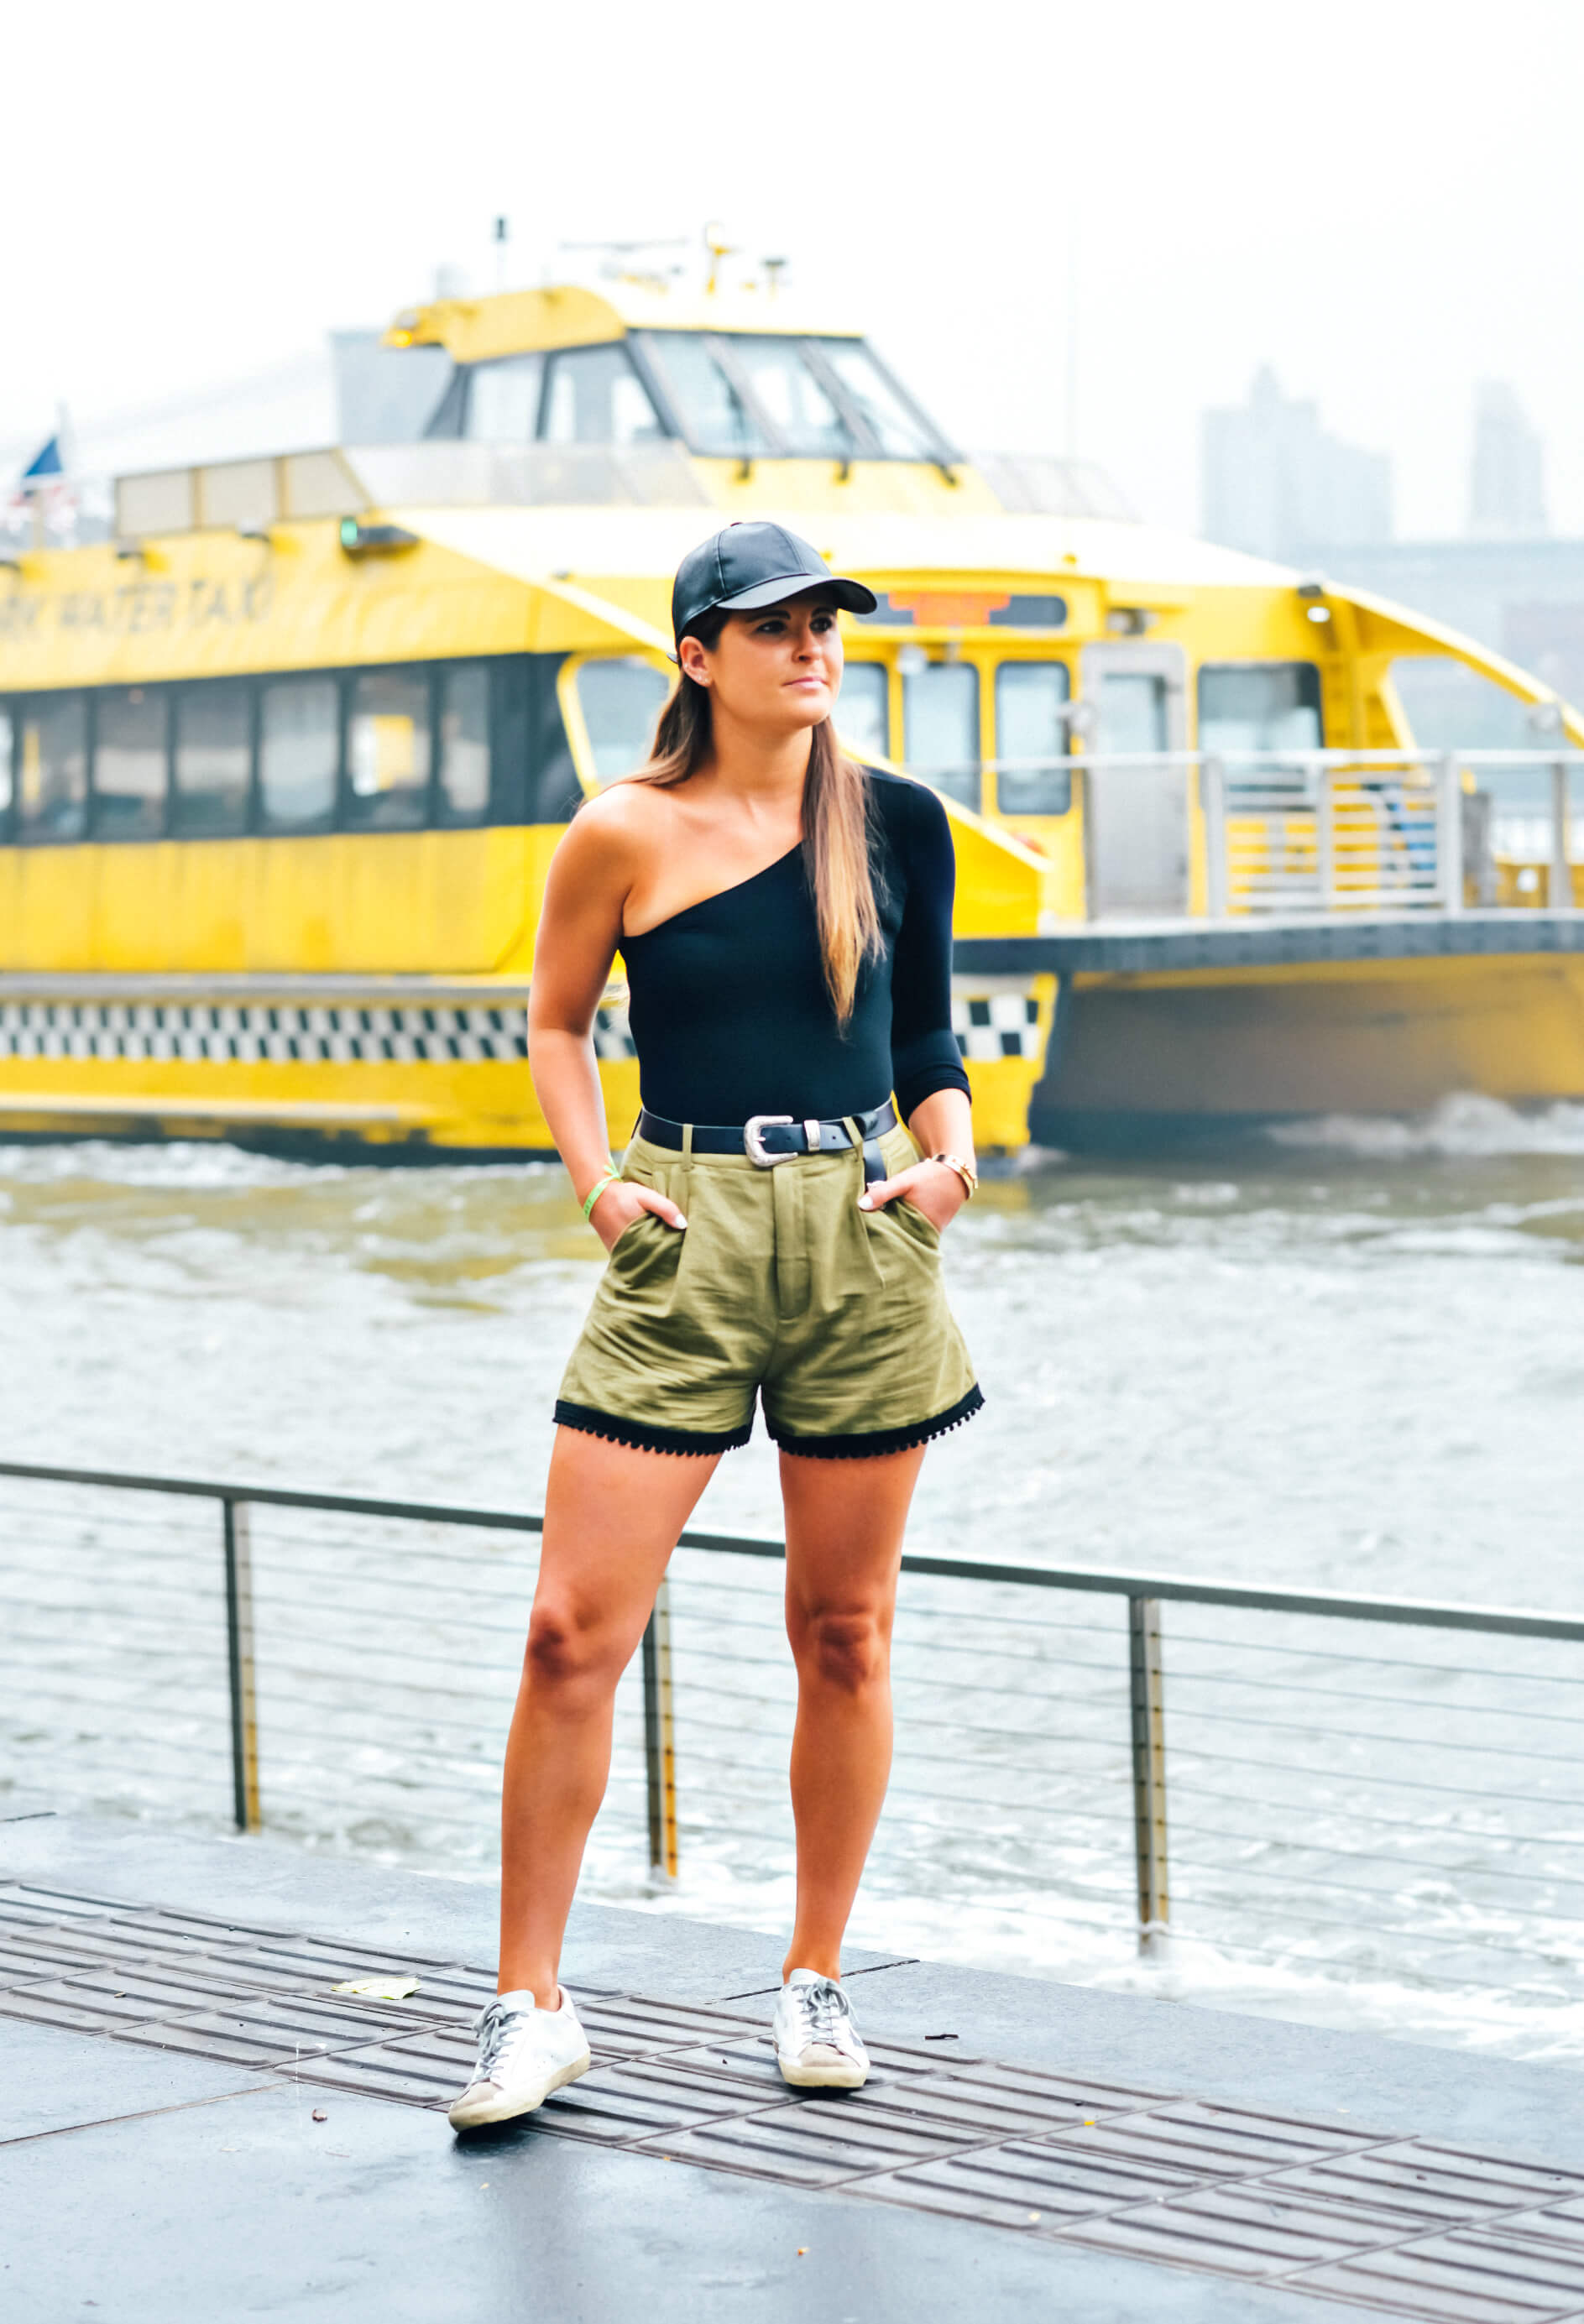 Commando One-Shoulder Bodysuit, Fall Outfit Ideas, Sporty Outfit, NYC Water Taxi, Tilden of To Be Bright